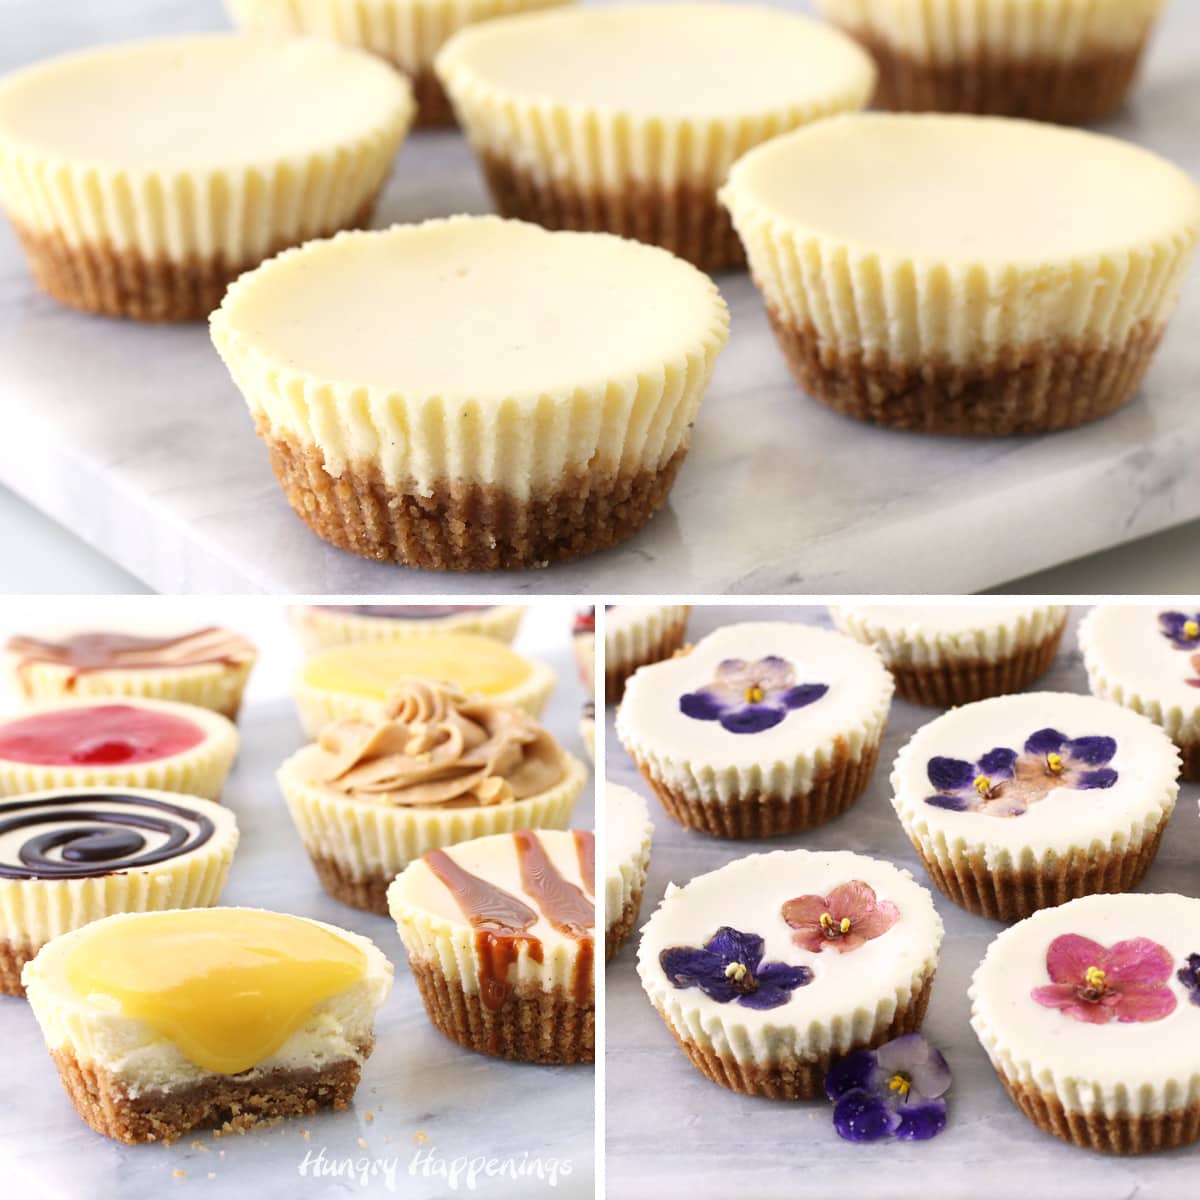 Mini cheesecakes collage of images with plain cheesecakes, cheesecake cups with toppings, and decorated edible flower cheesecakes.